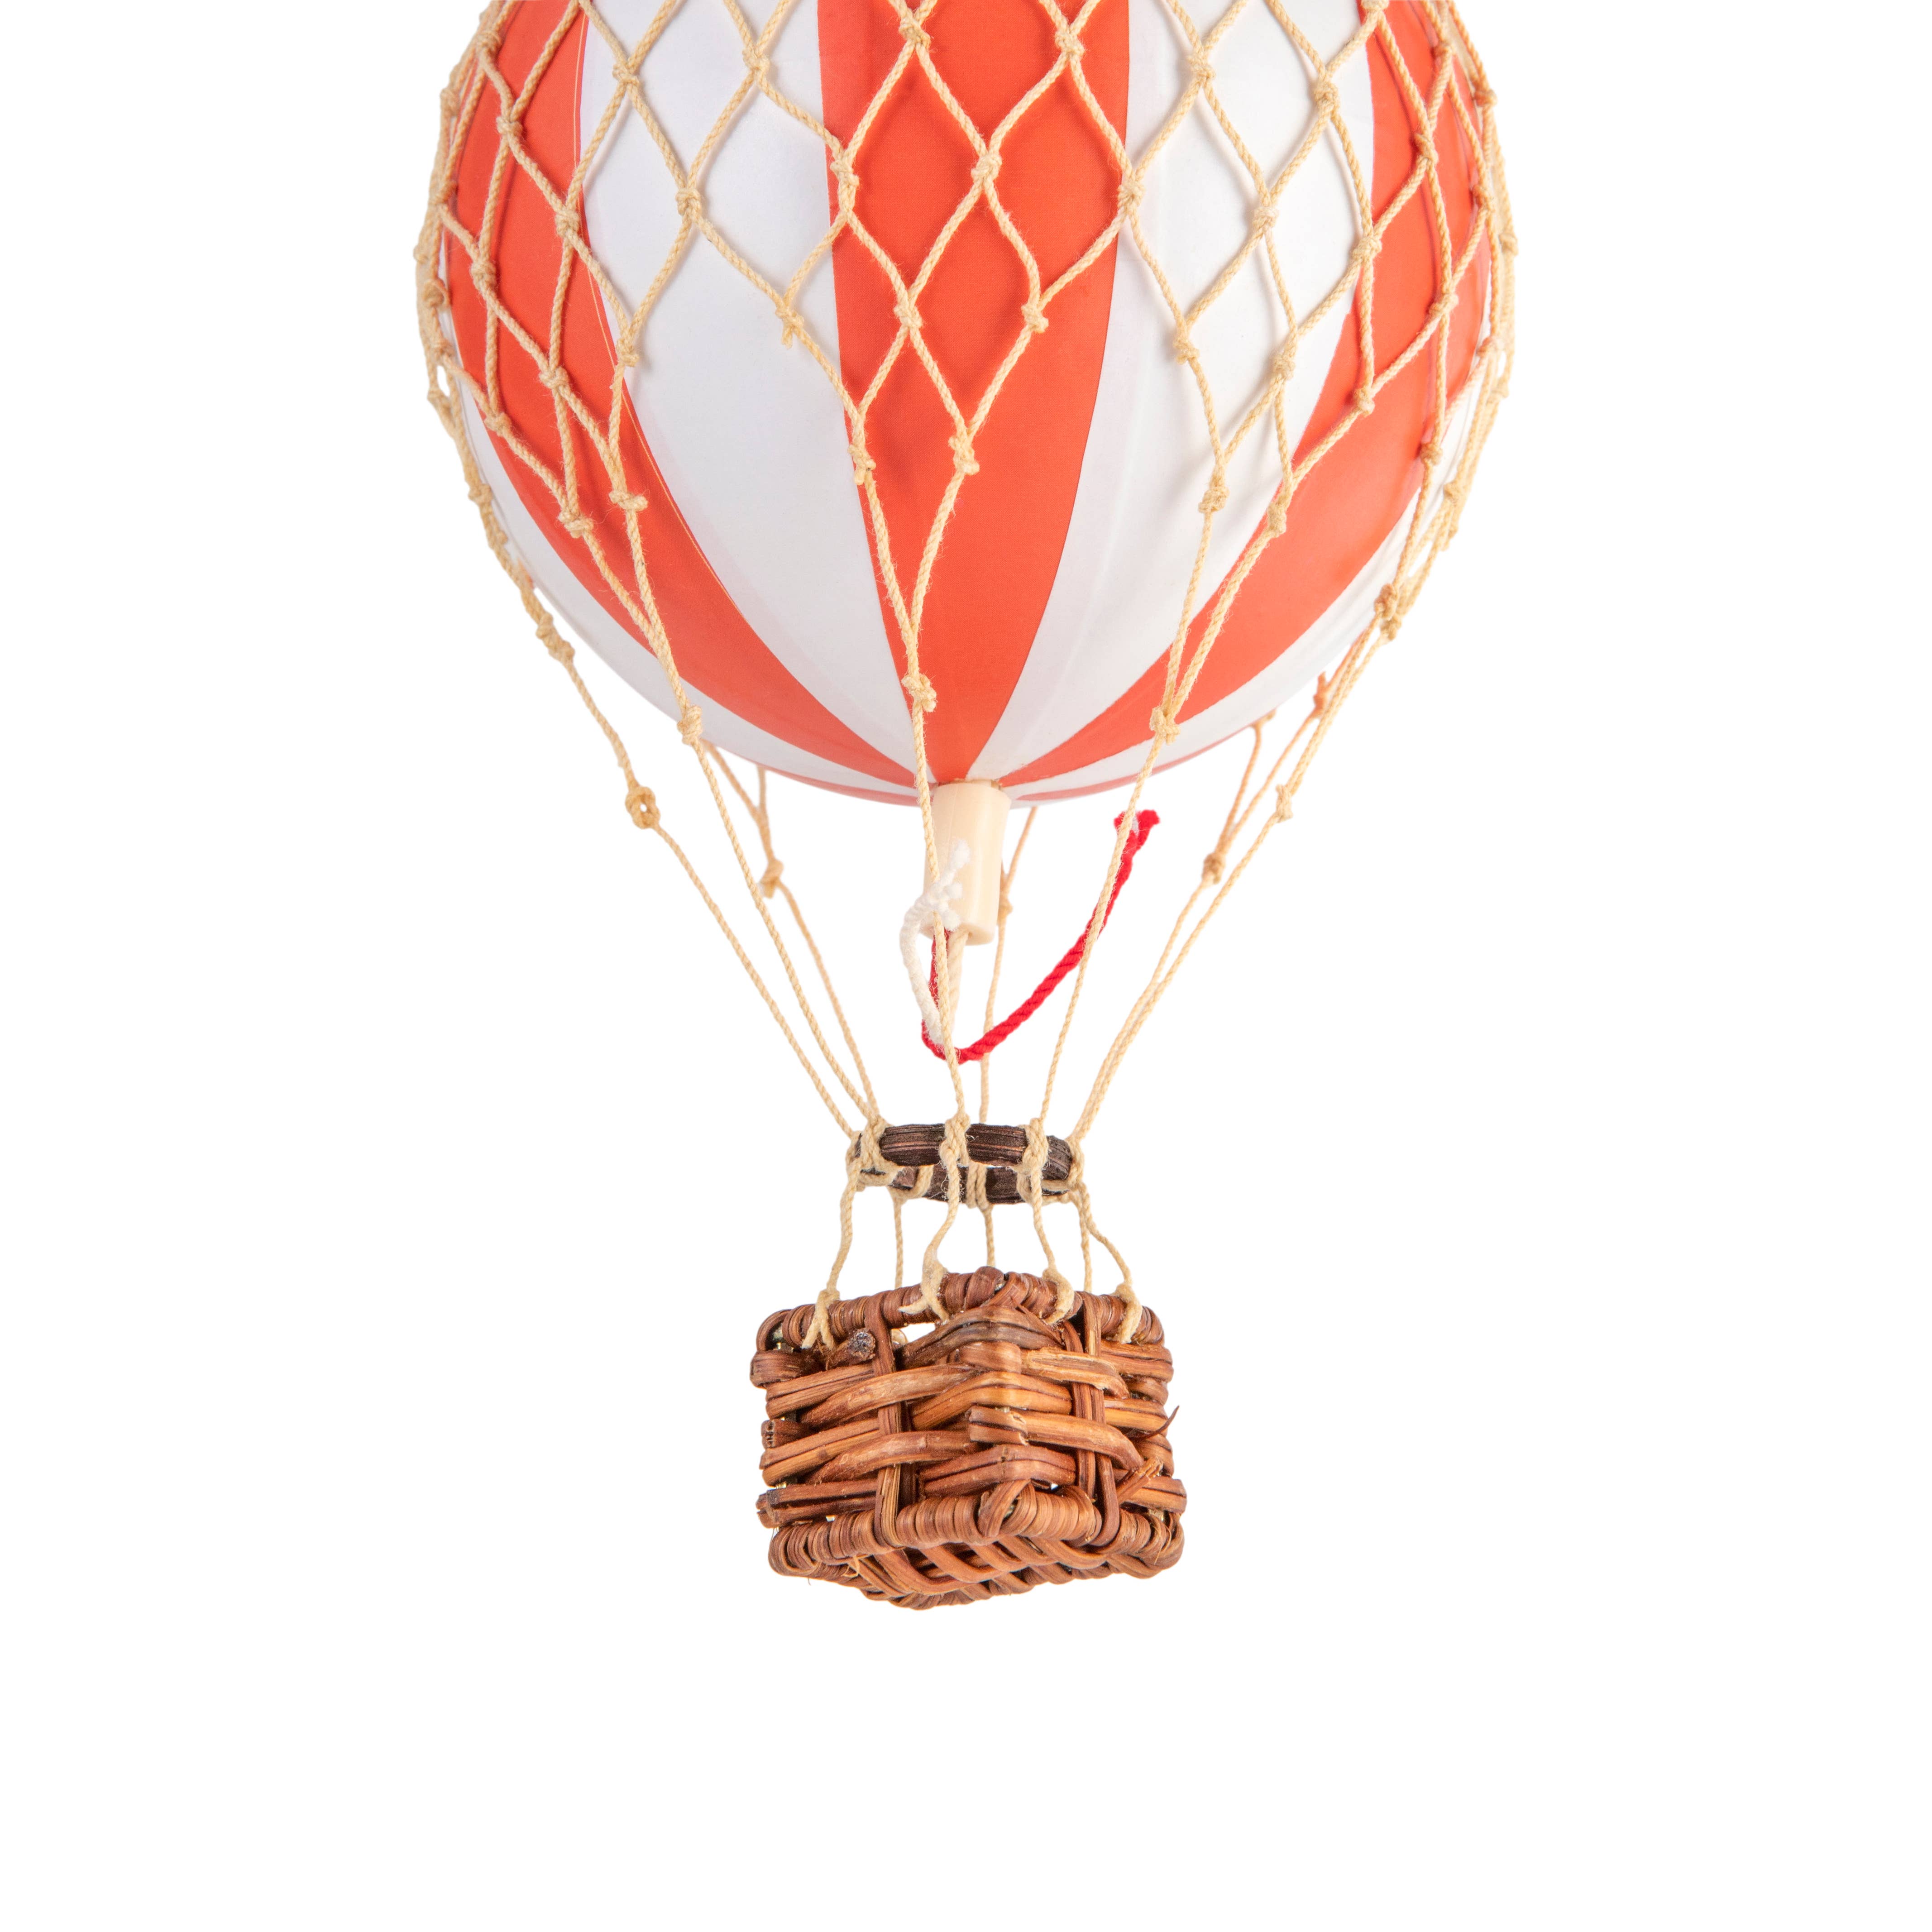 Floating The Skies Hot Air Balloon - USA by Authentic Models - Harold&Charles